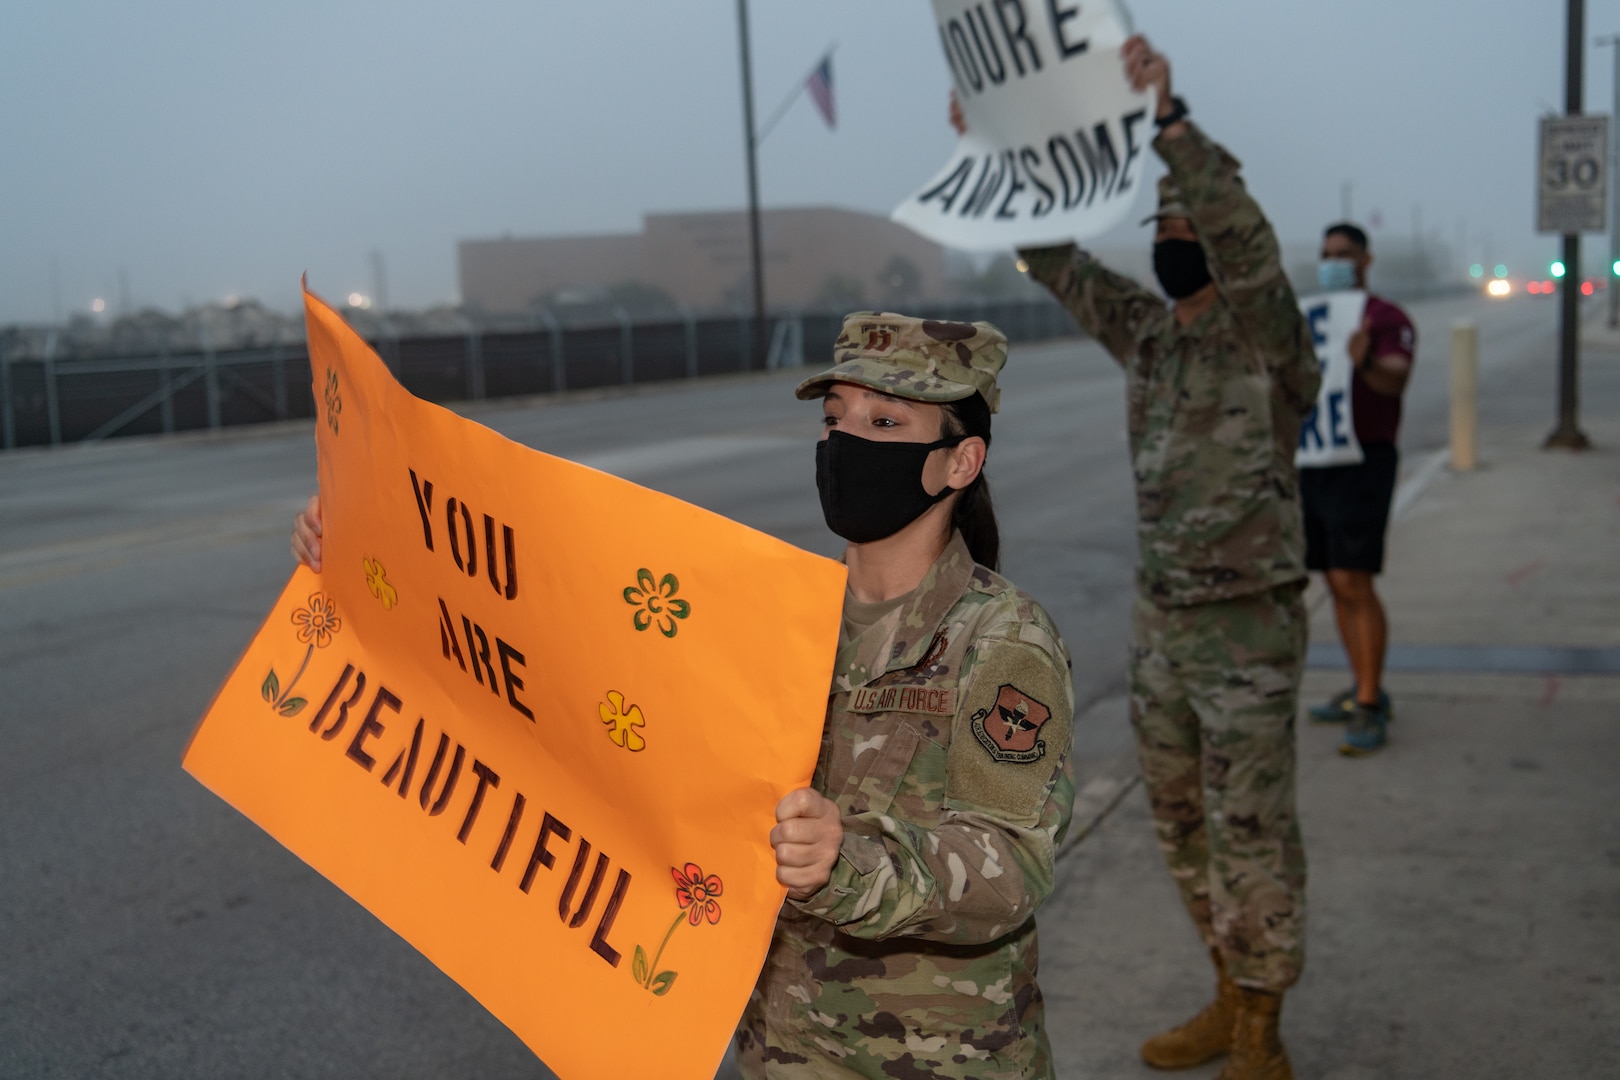 U.S. Air Force Capt. Brandy Dorrough (front), assistant director of the 323rd Training Squadron, and Tech Sgt. Lee Fast, interim 1st Sgt. for the 323rd Training Squadron, greet cars during the We Care Day event, April 16th, 2021, at Joint Base San Antonio-Lackland, Texas.